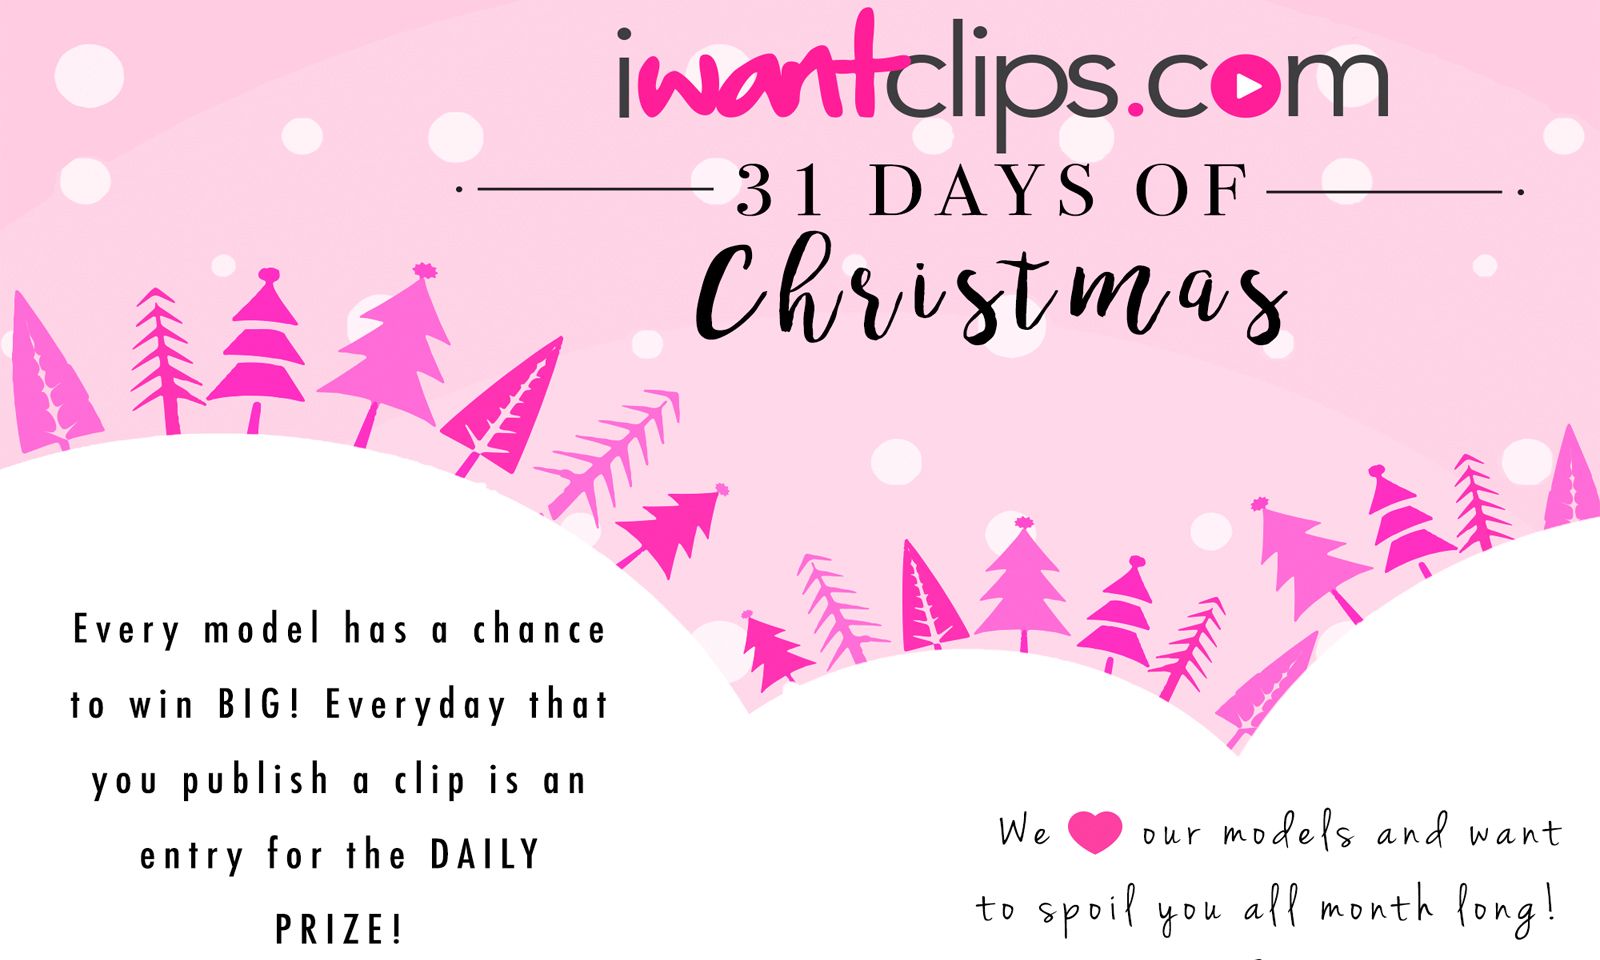 iWantClips Launches 31 Days of Christmas